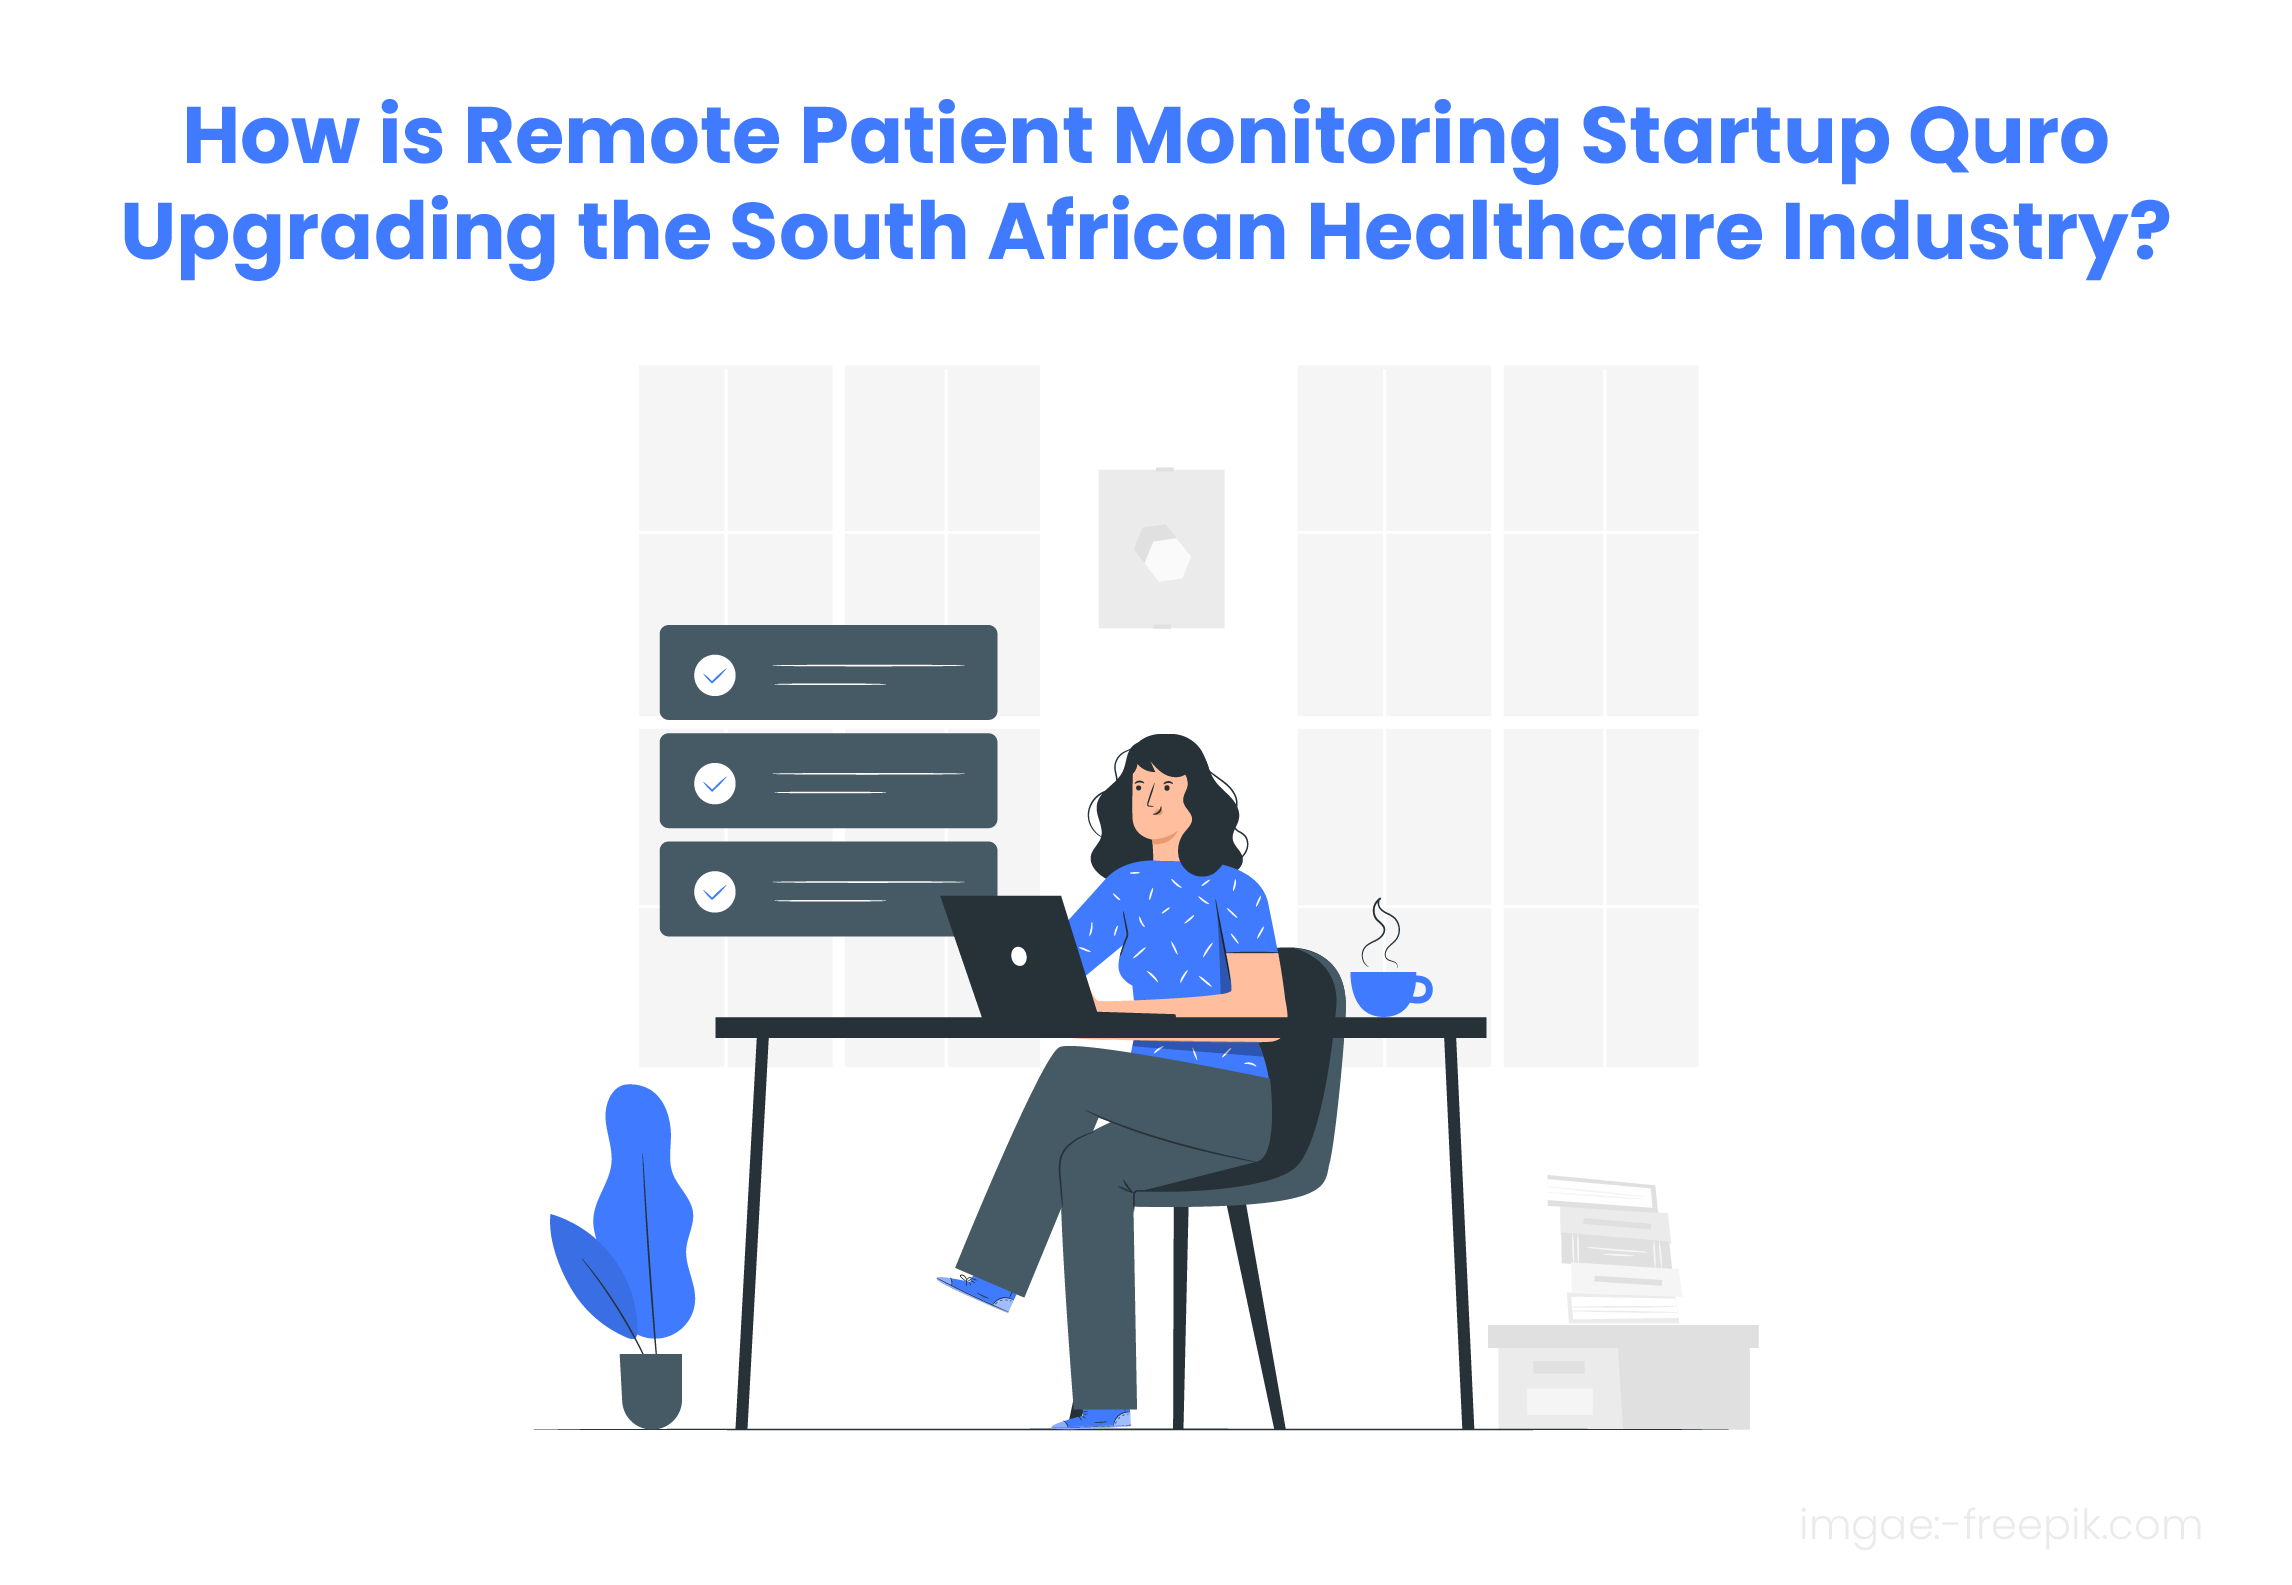 How is Remote Patient Monitoring Startup Quro Upgrading the South African Healthcare Industry?